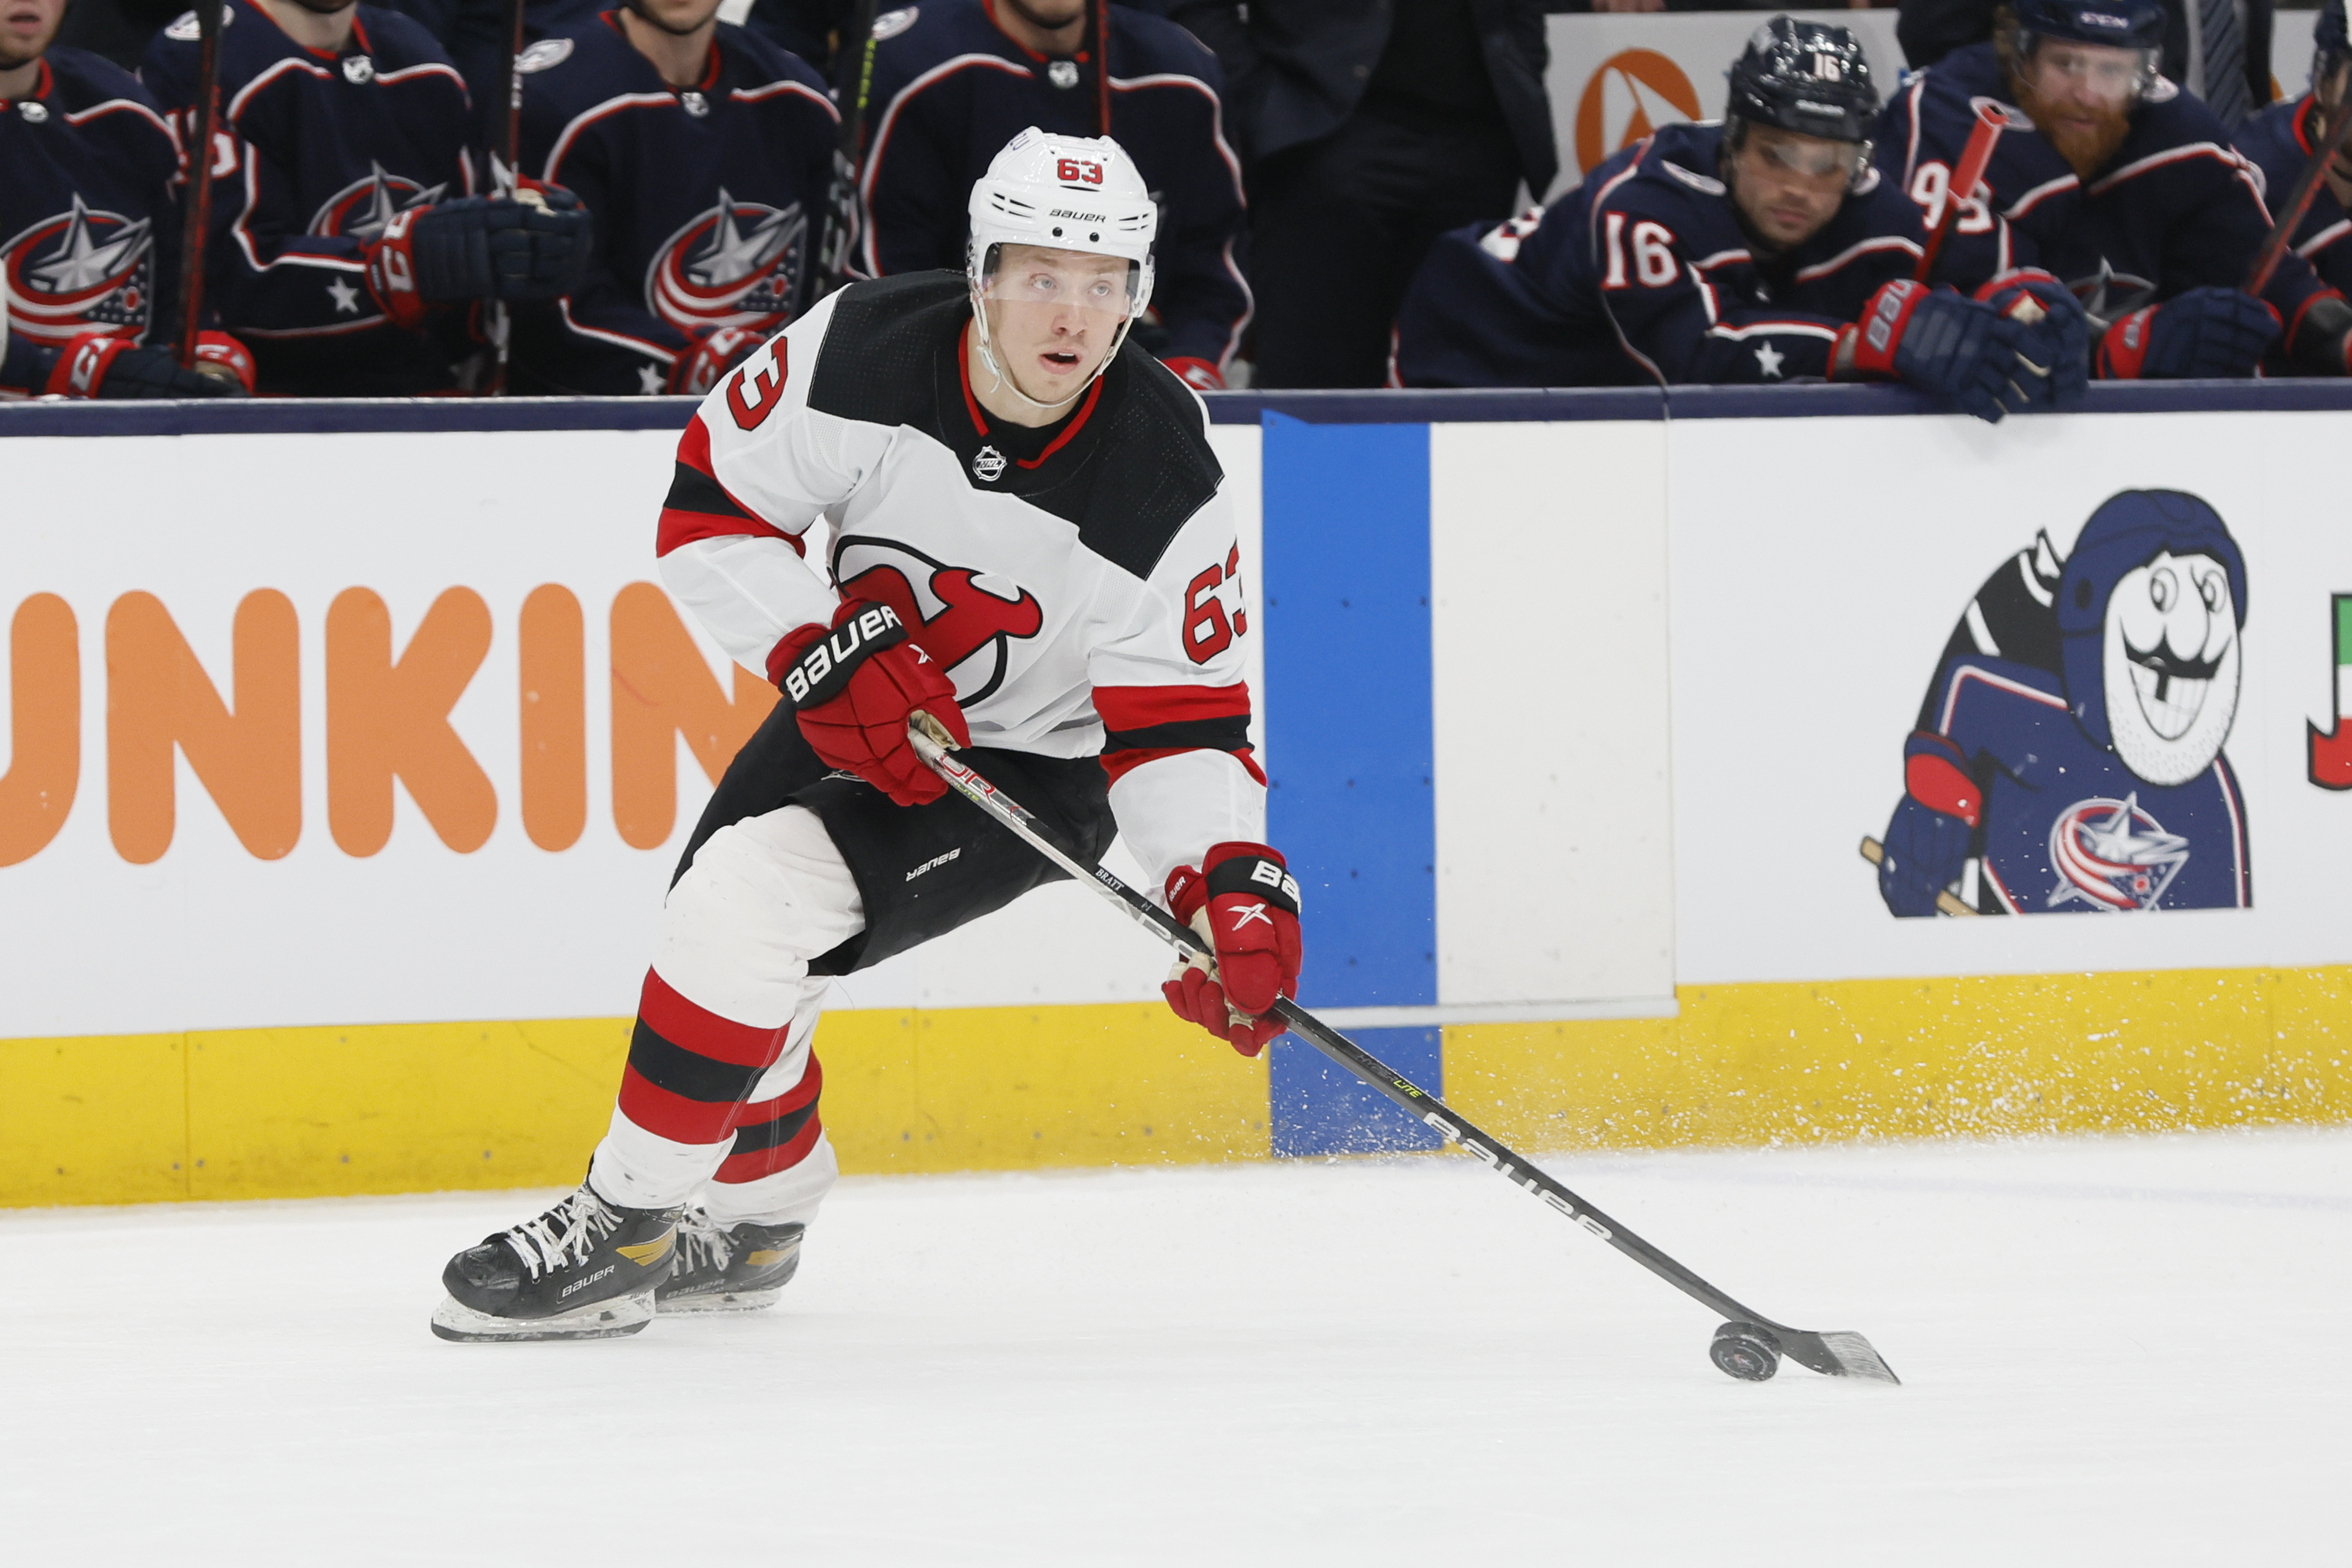 Jesper Bratt's hat trick lifts Devils over Lightning - The Rink Live   Comprehensive coverage of youth, junior, high school and college hockey